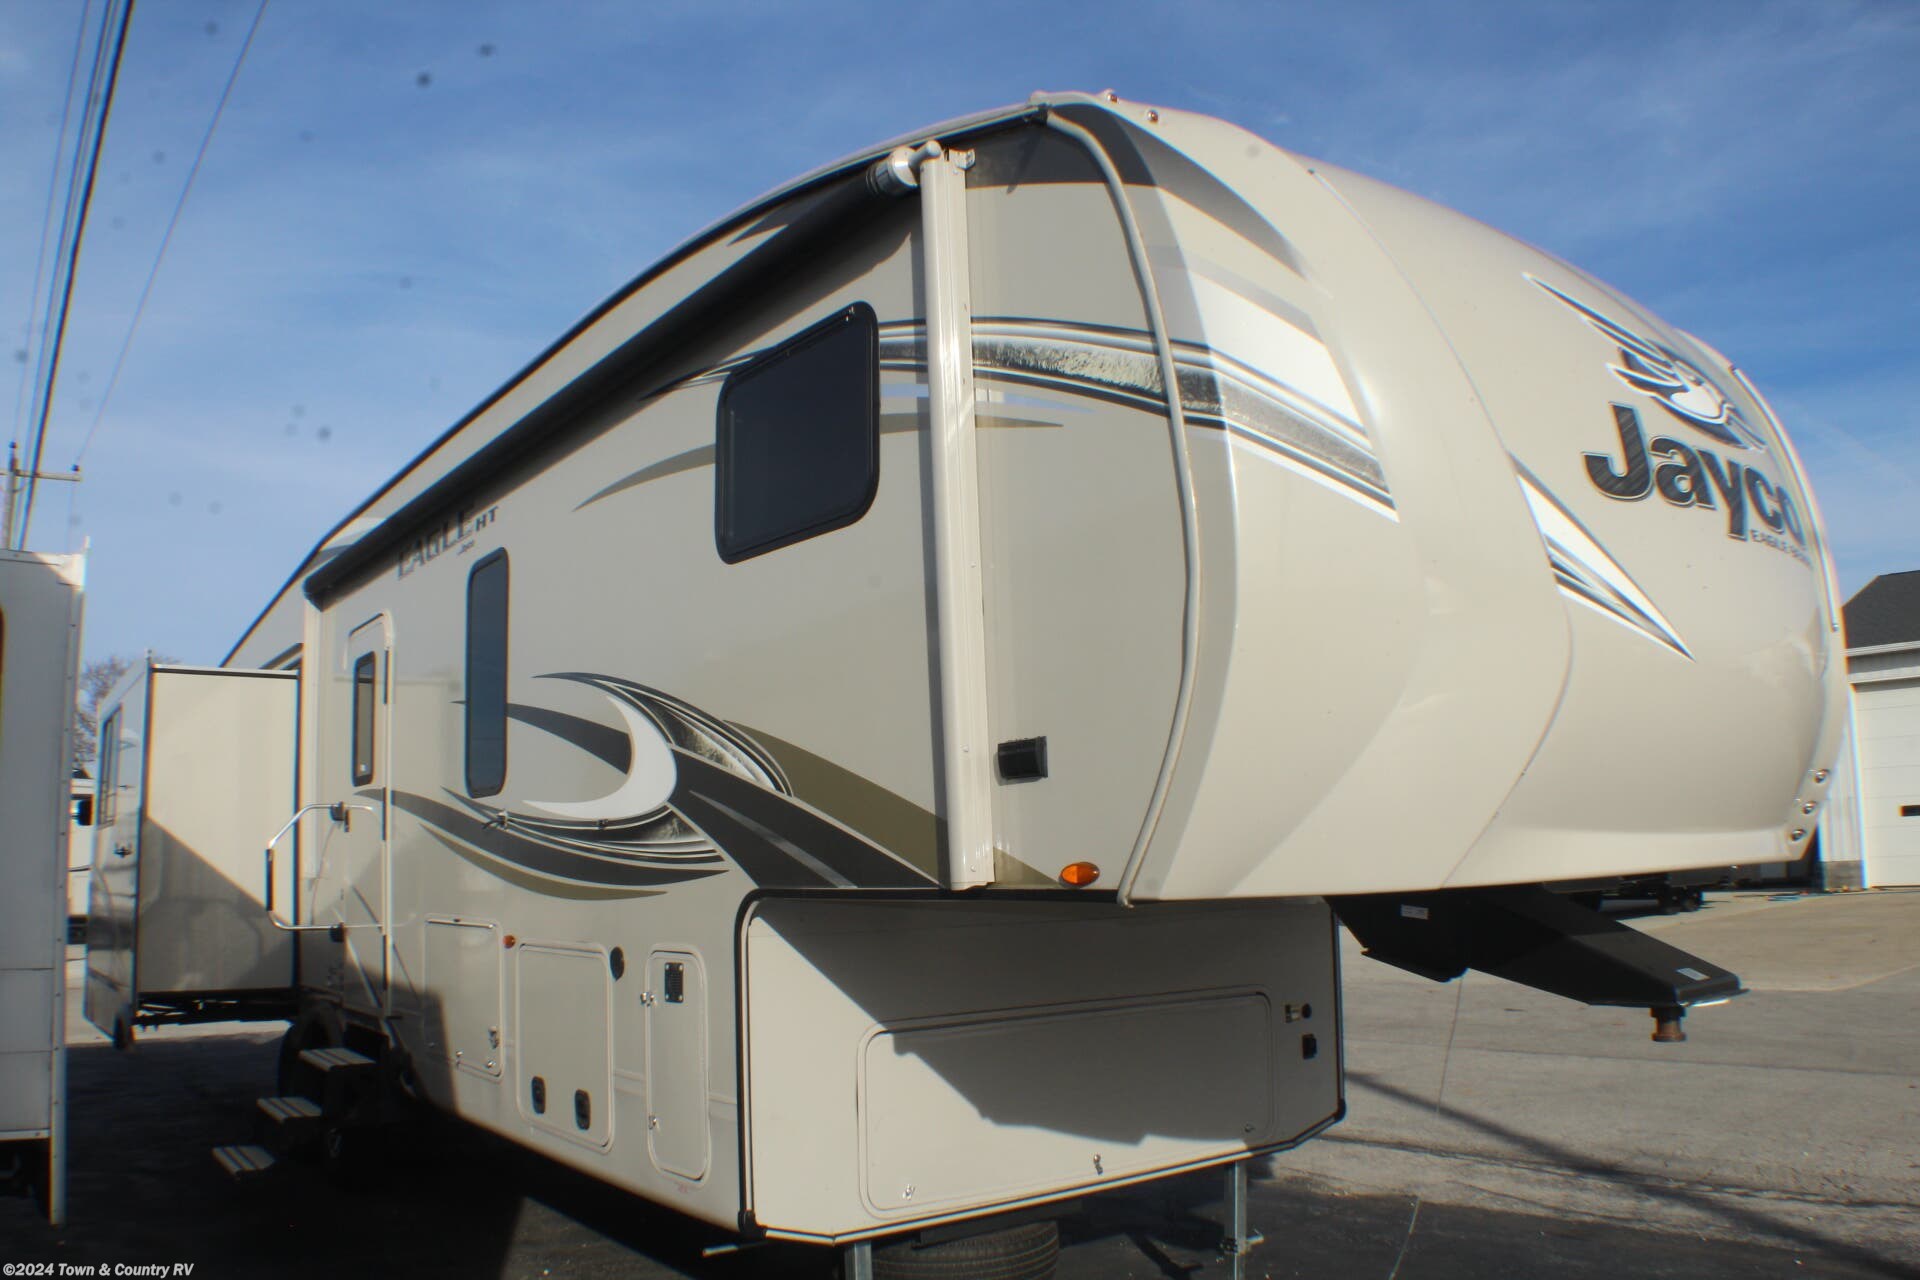 2018 Jayco Eagle HT 30.5MBOK RV for Sale in Clyde, OH 43410 | 4379 | RVUSA.com Classifieds 2018 Jayco Eagle Ht 30.5 Mbok For Sale